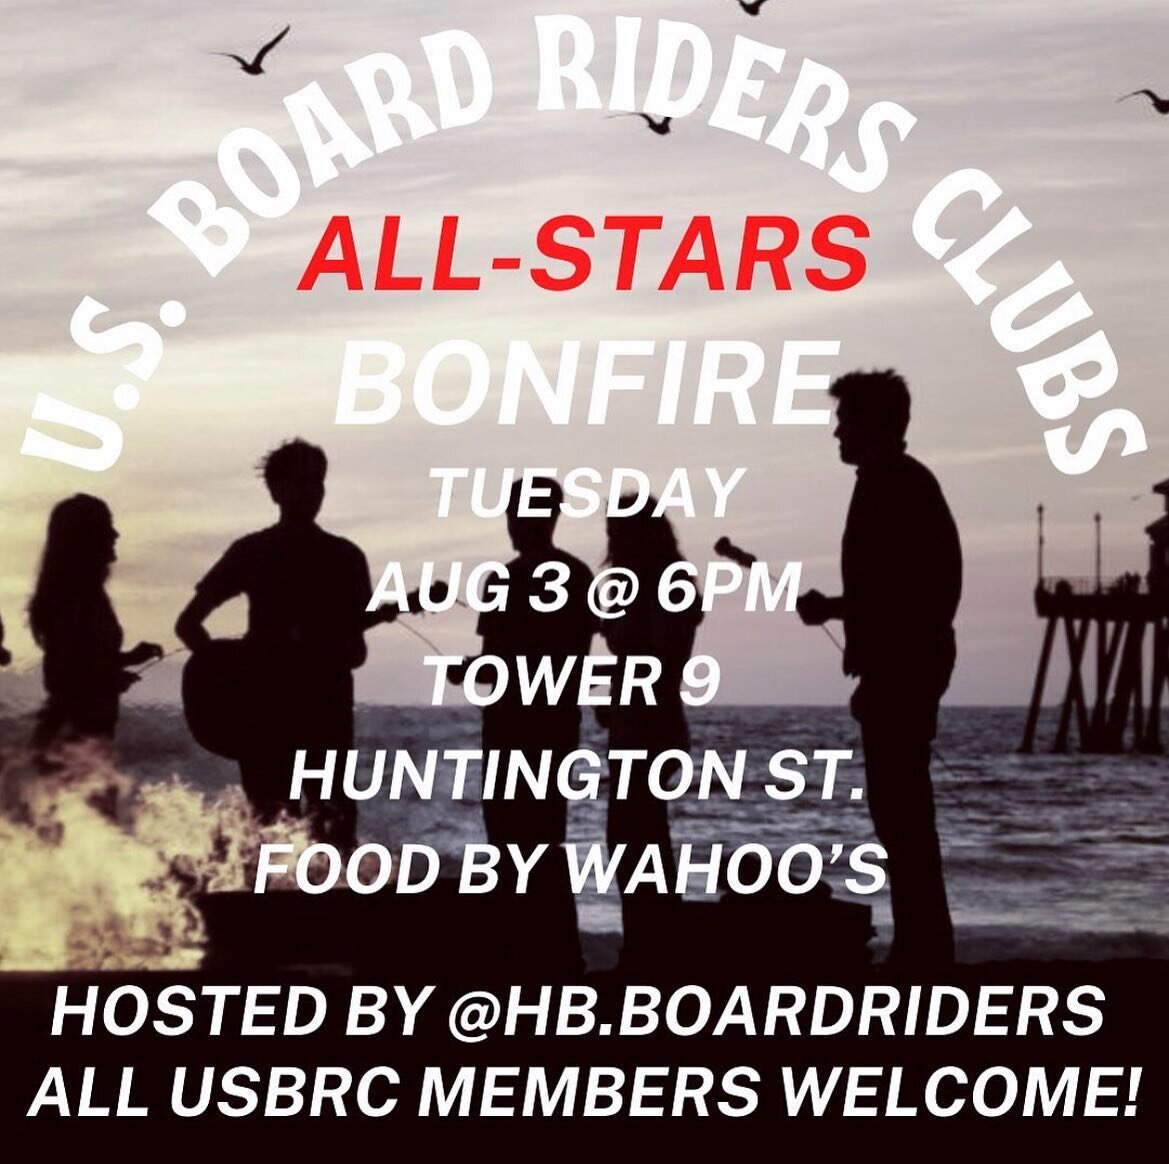 The &lsquo;Jack&rsquo;s Surfboards Pro Presents the 2021 US Board Riders All Stars&rsquo; is happening this Wednesday at the HB Pier. On Tuesday evening our friends from @hb.boardriders are hosting an old-school beach bonfire to get us all together